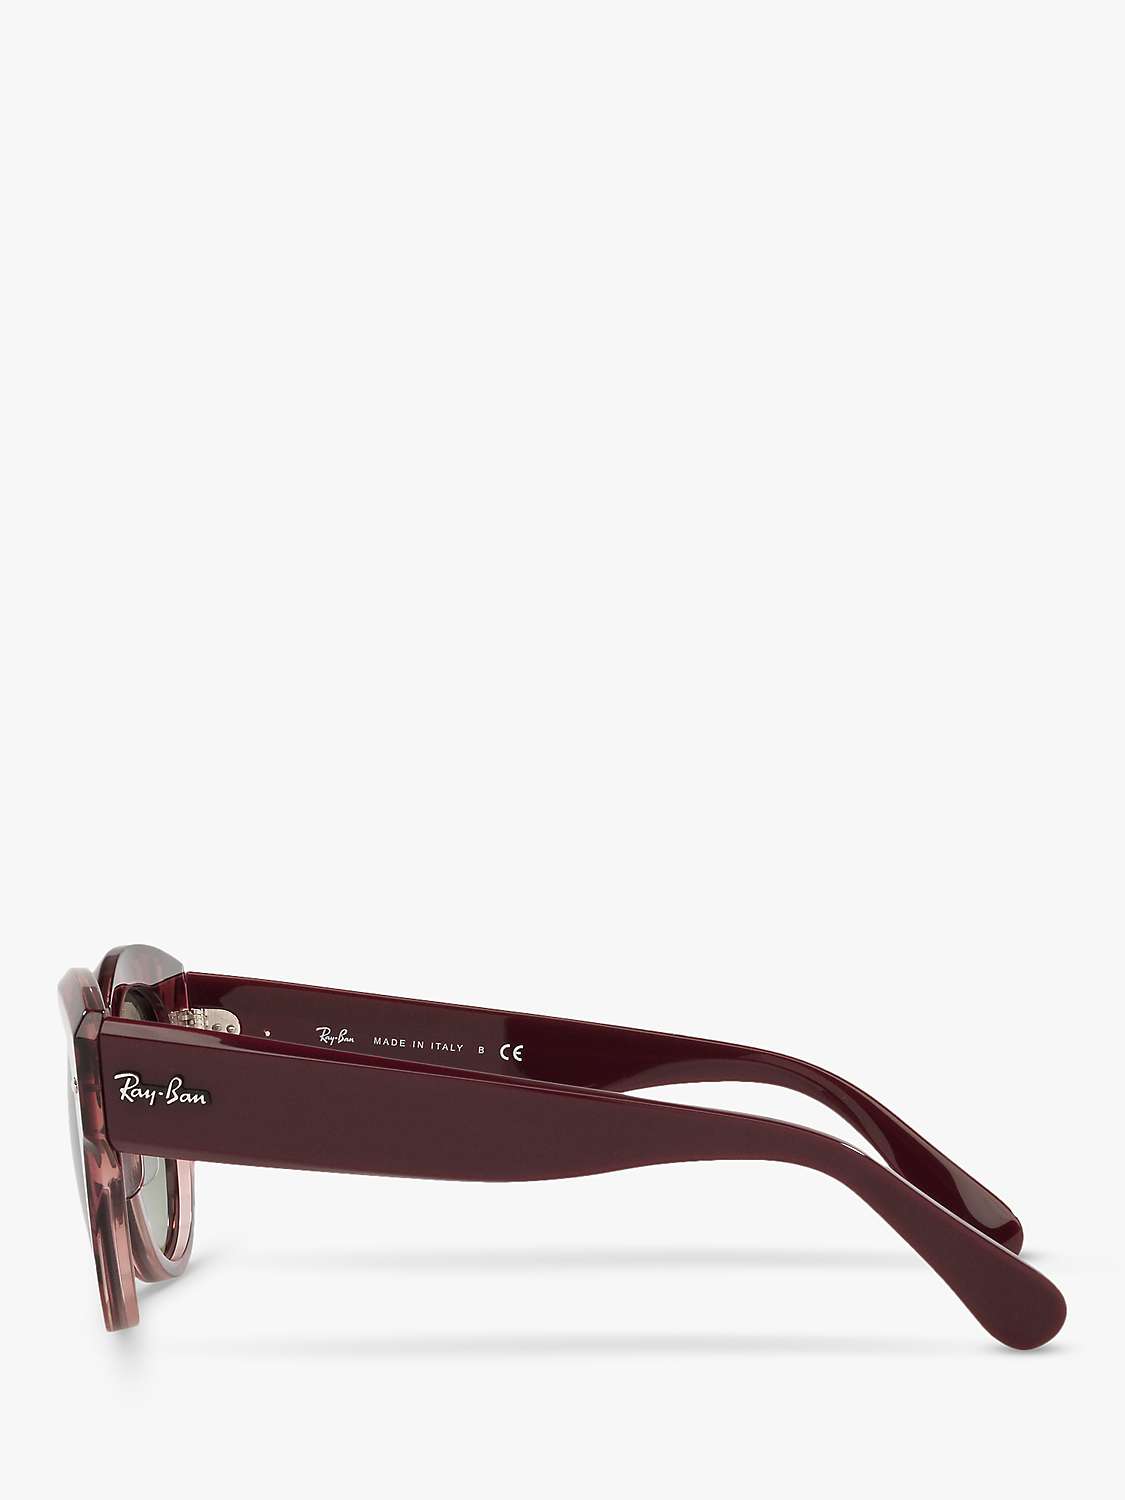 Buy Ray-Ban RB2192 Women's Round Sunglasses Online at johnlewis.com